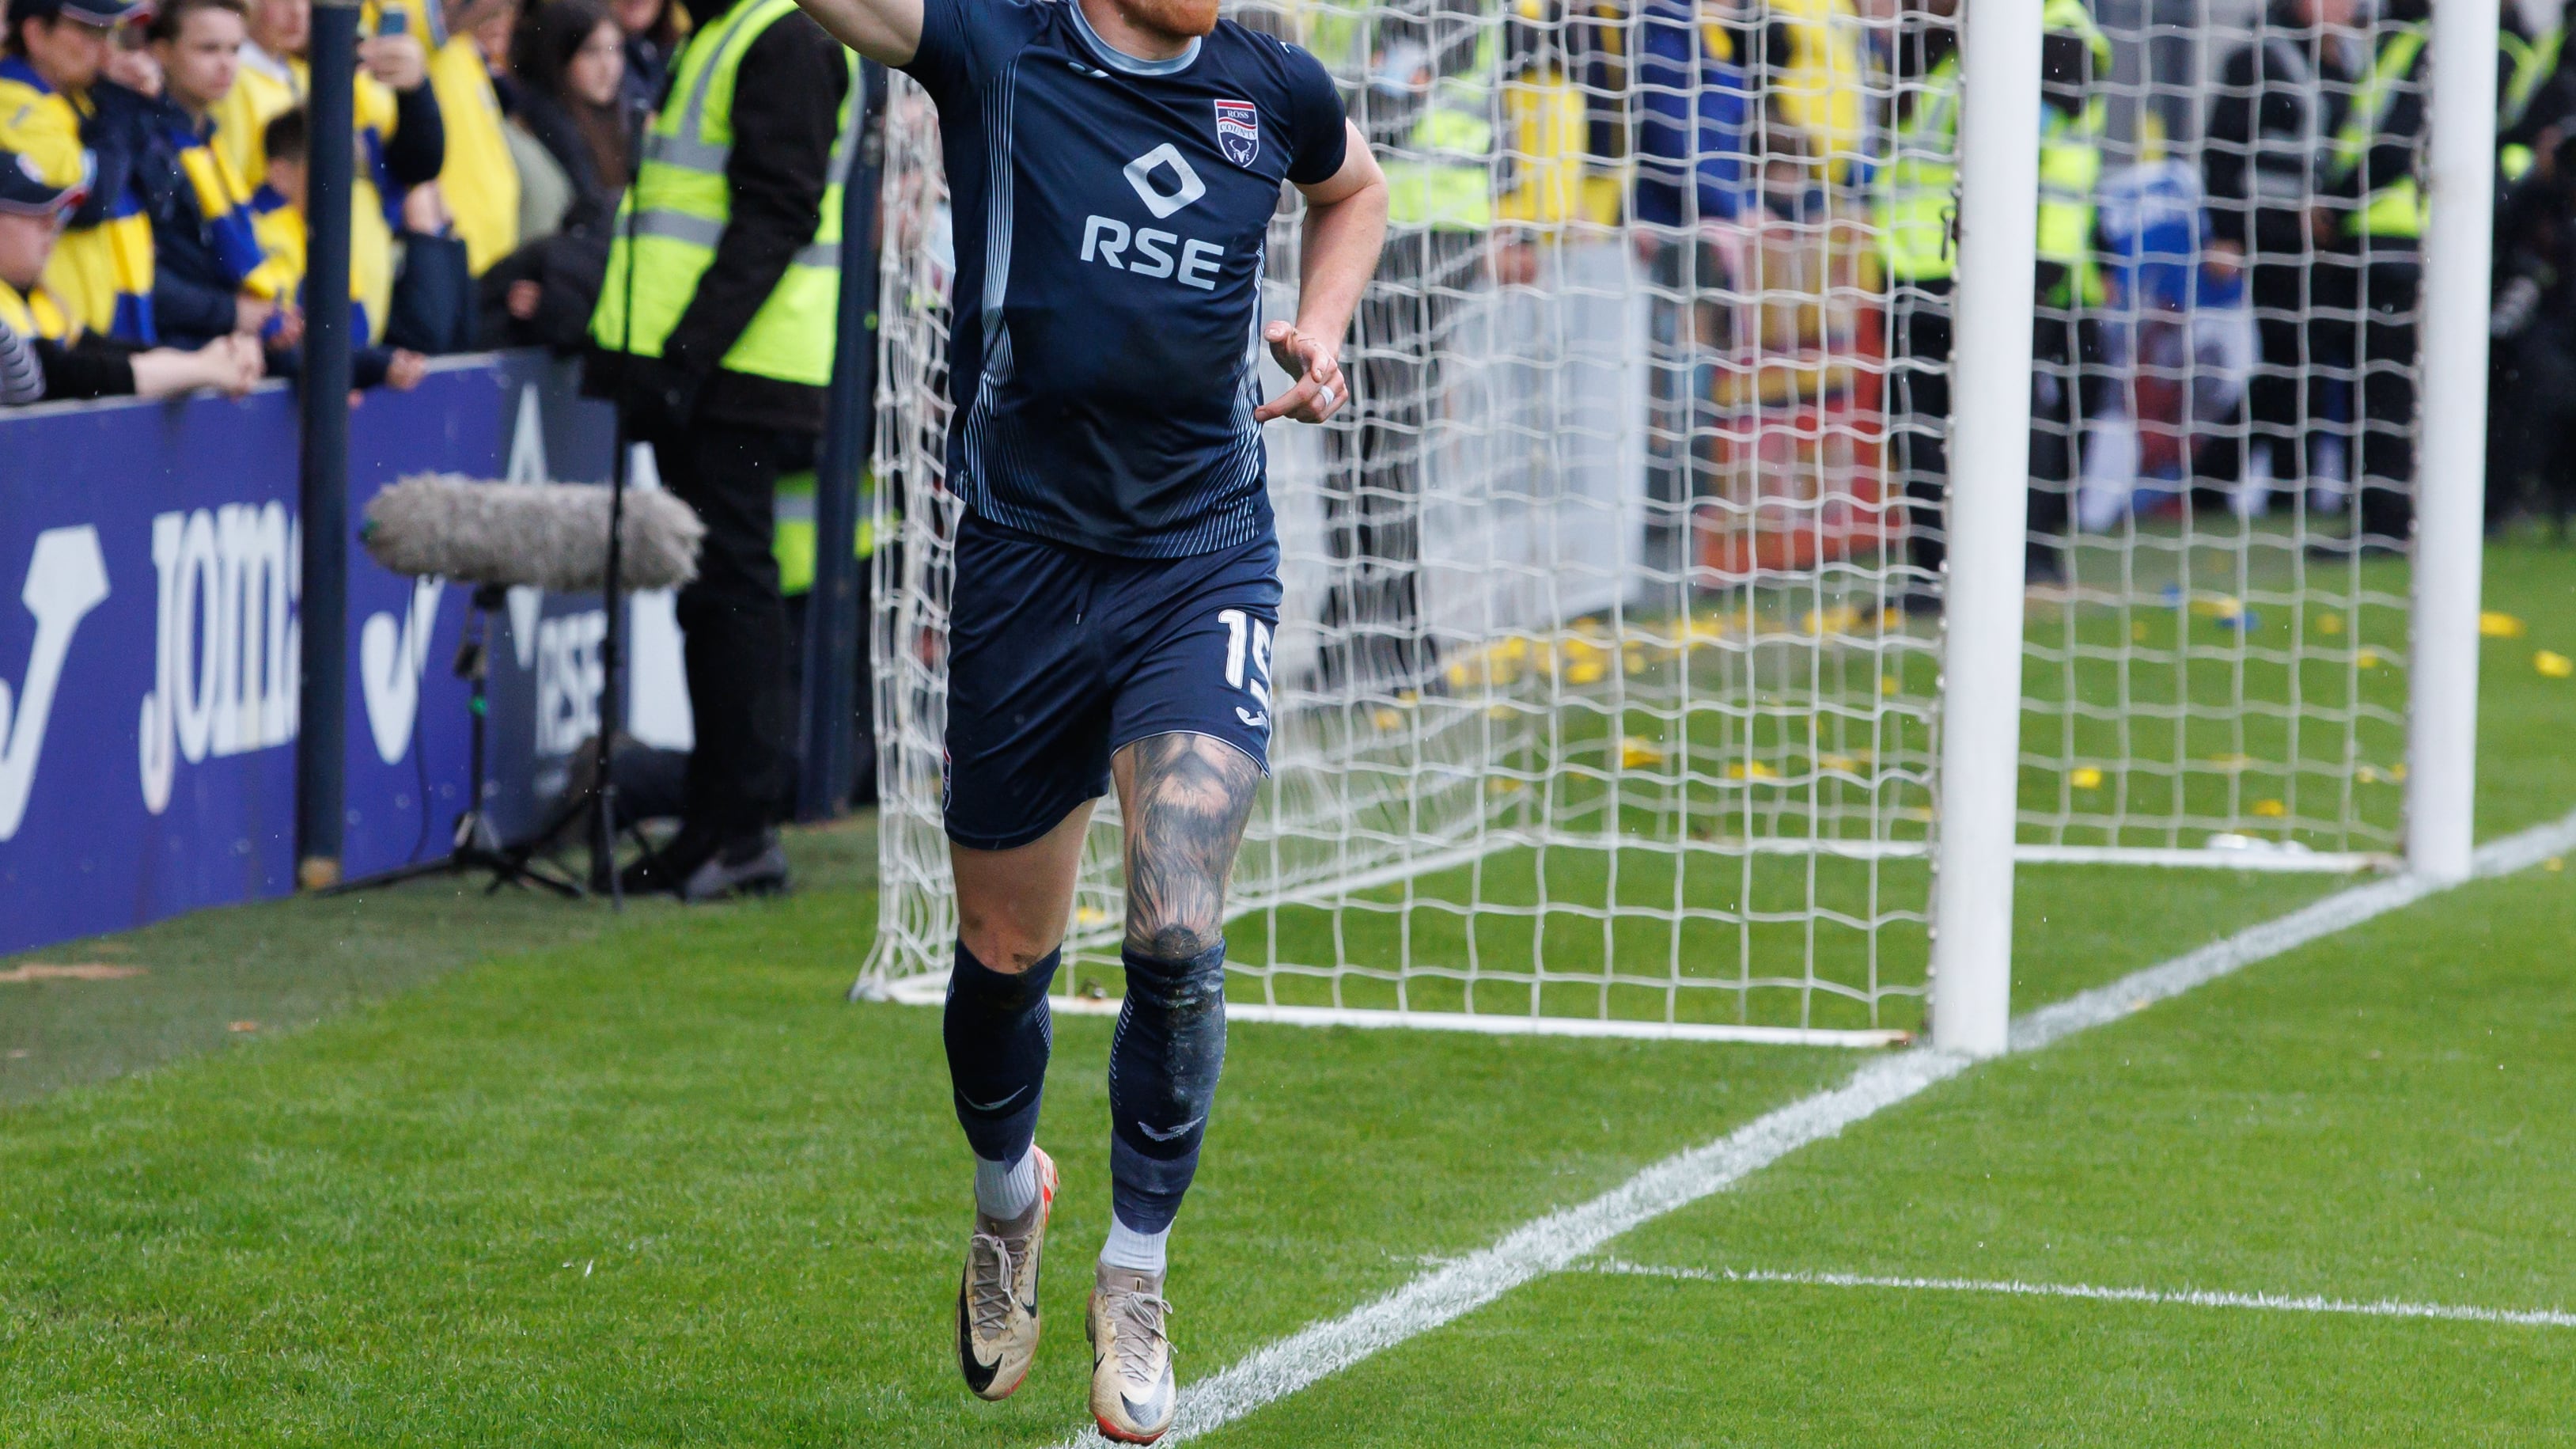 Ross County’s Simon Murray scores first of double against Raith Rovers